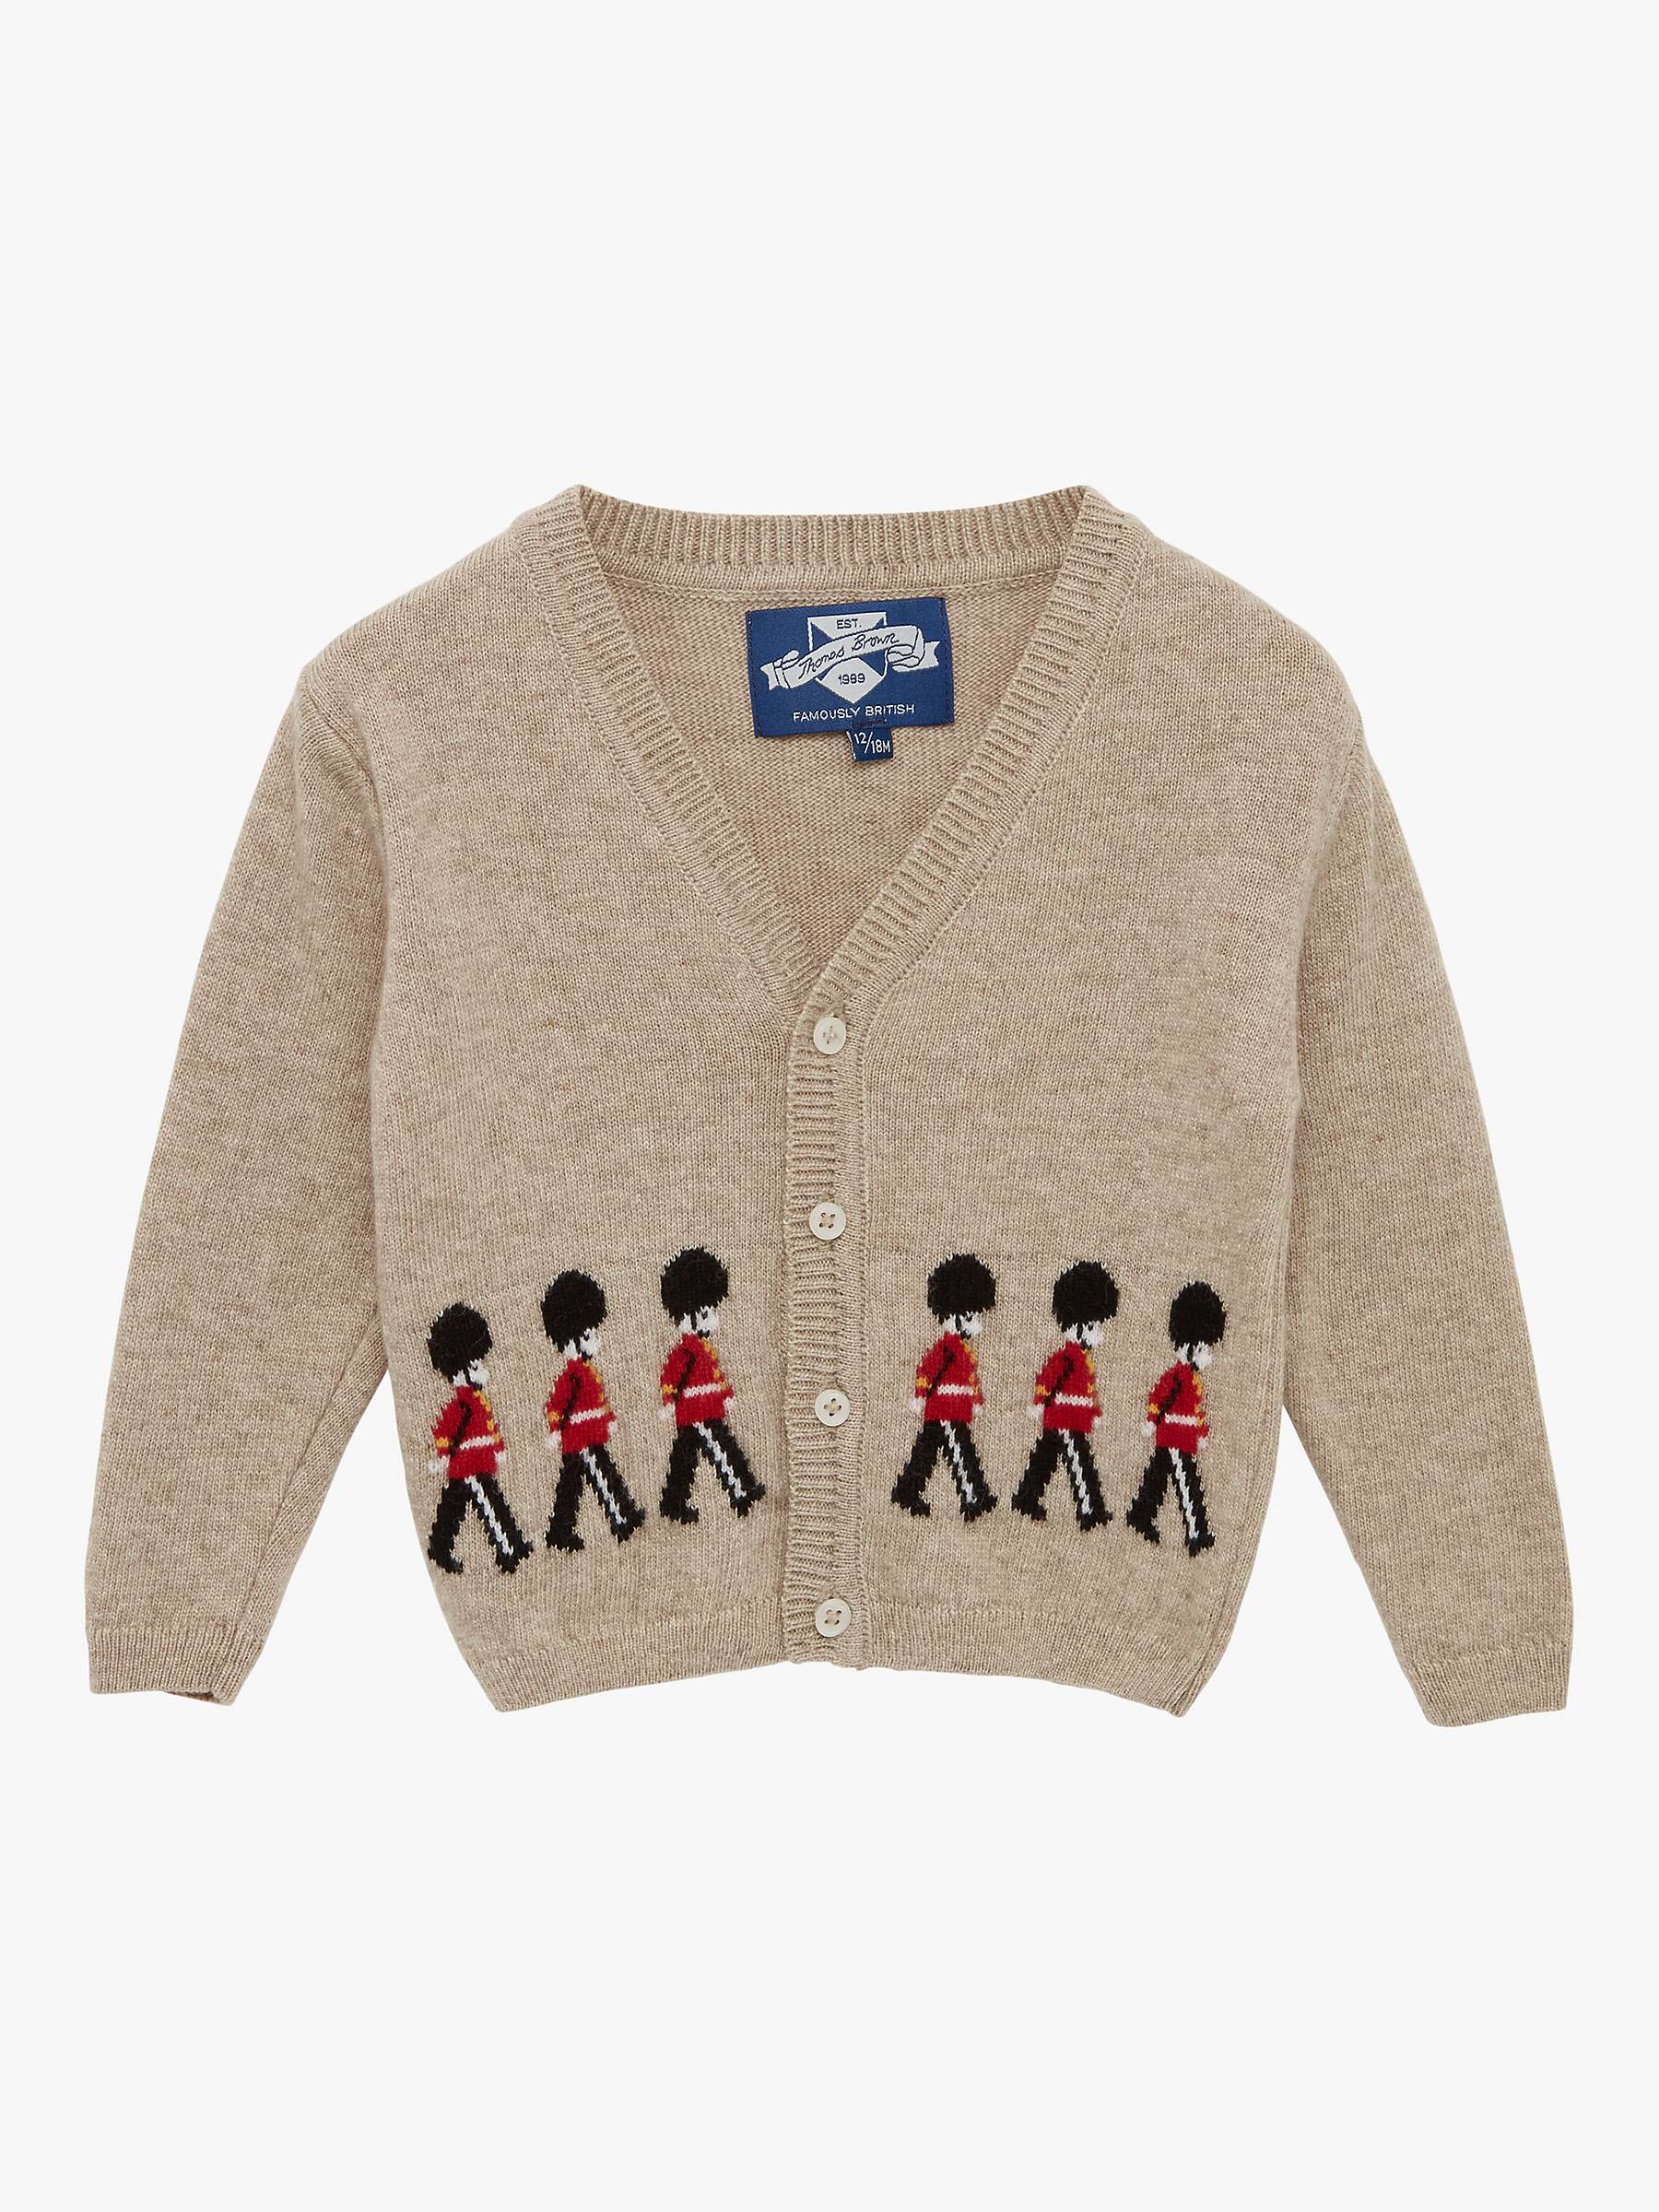 Buy Trotters Baby Guardsman Wool & Cashmere Blend Cardigan, Oatmeal Online at johnlewis.com